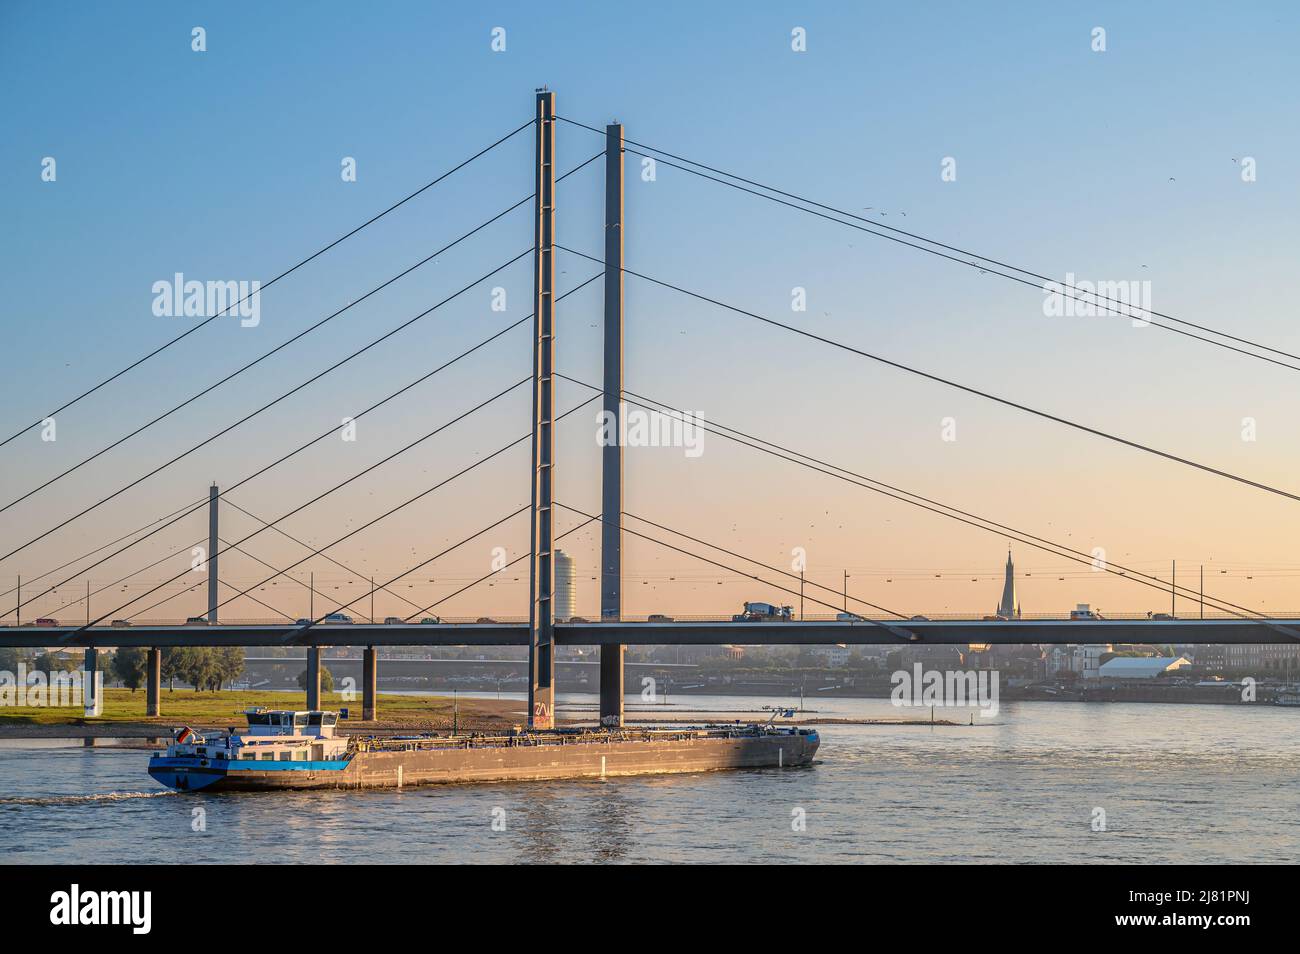 Inland vessel in front of the Duesseldorf Rhine knee bridge at dawn, NRW, Germany Stock Photo